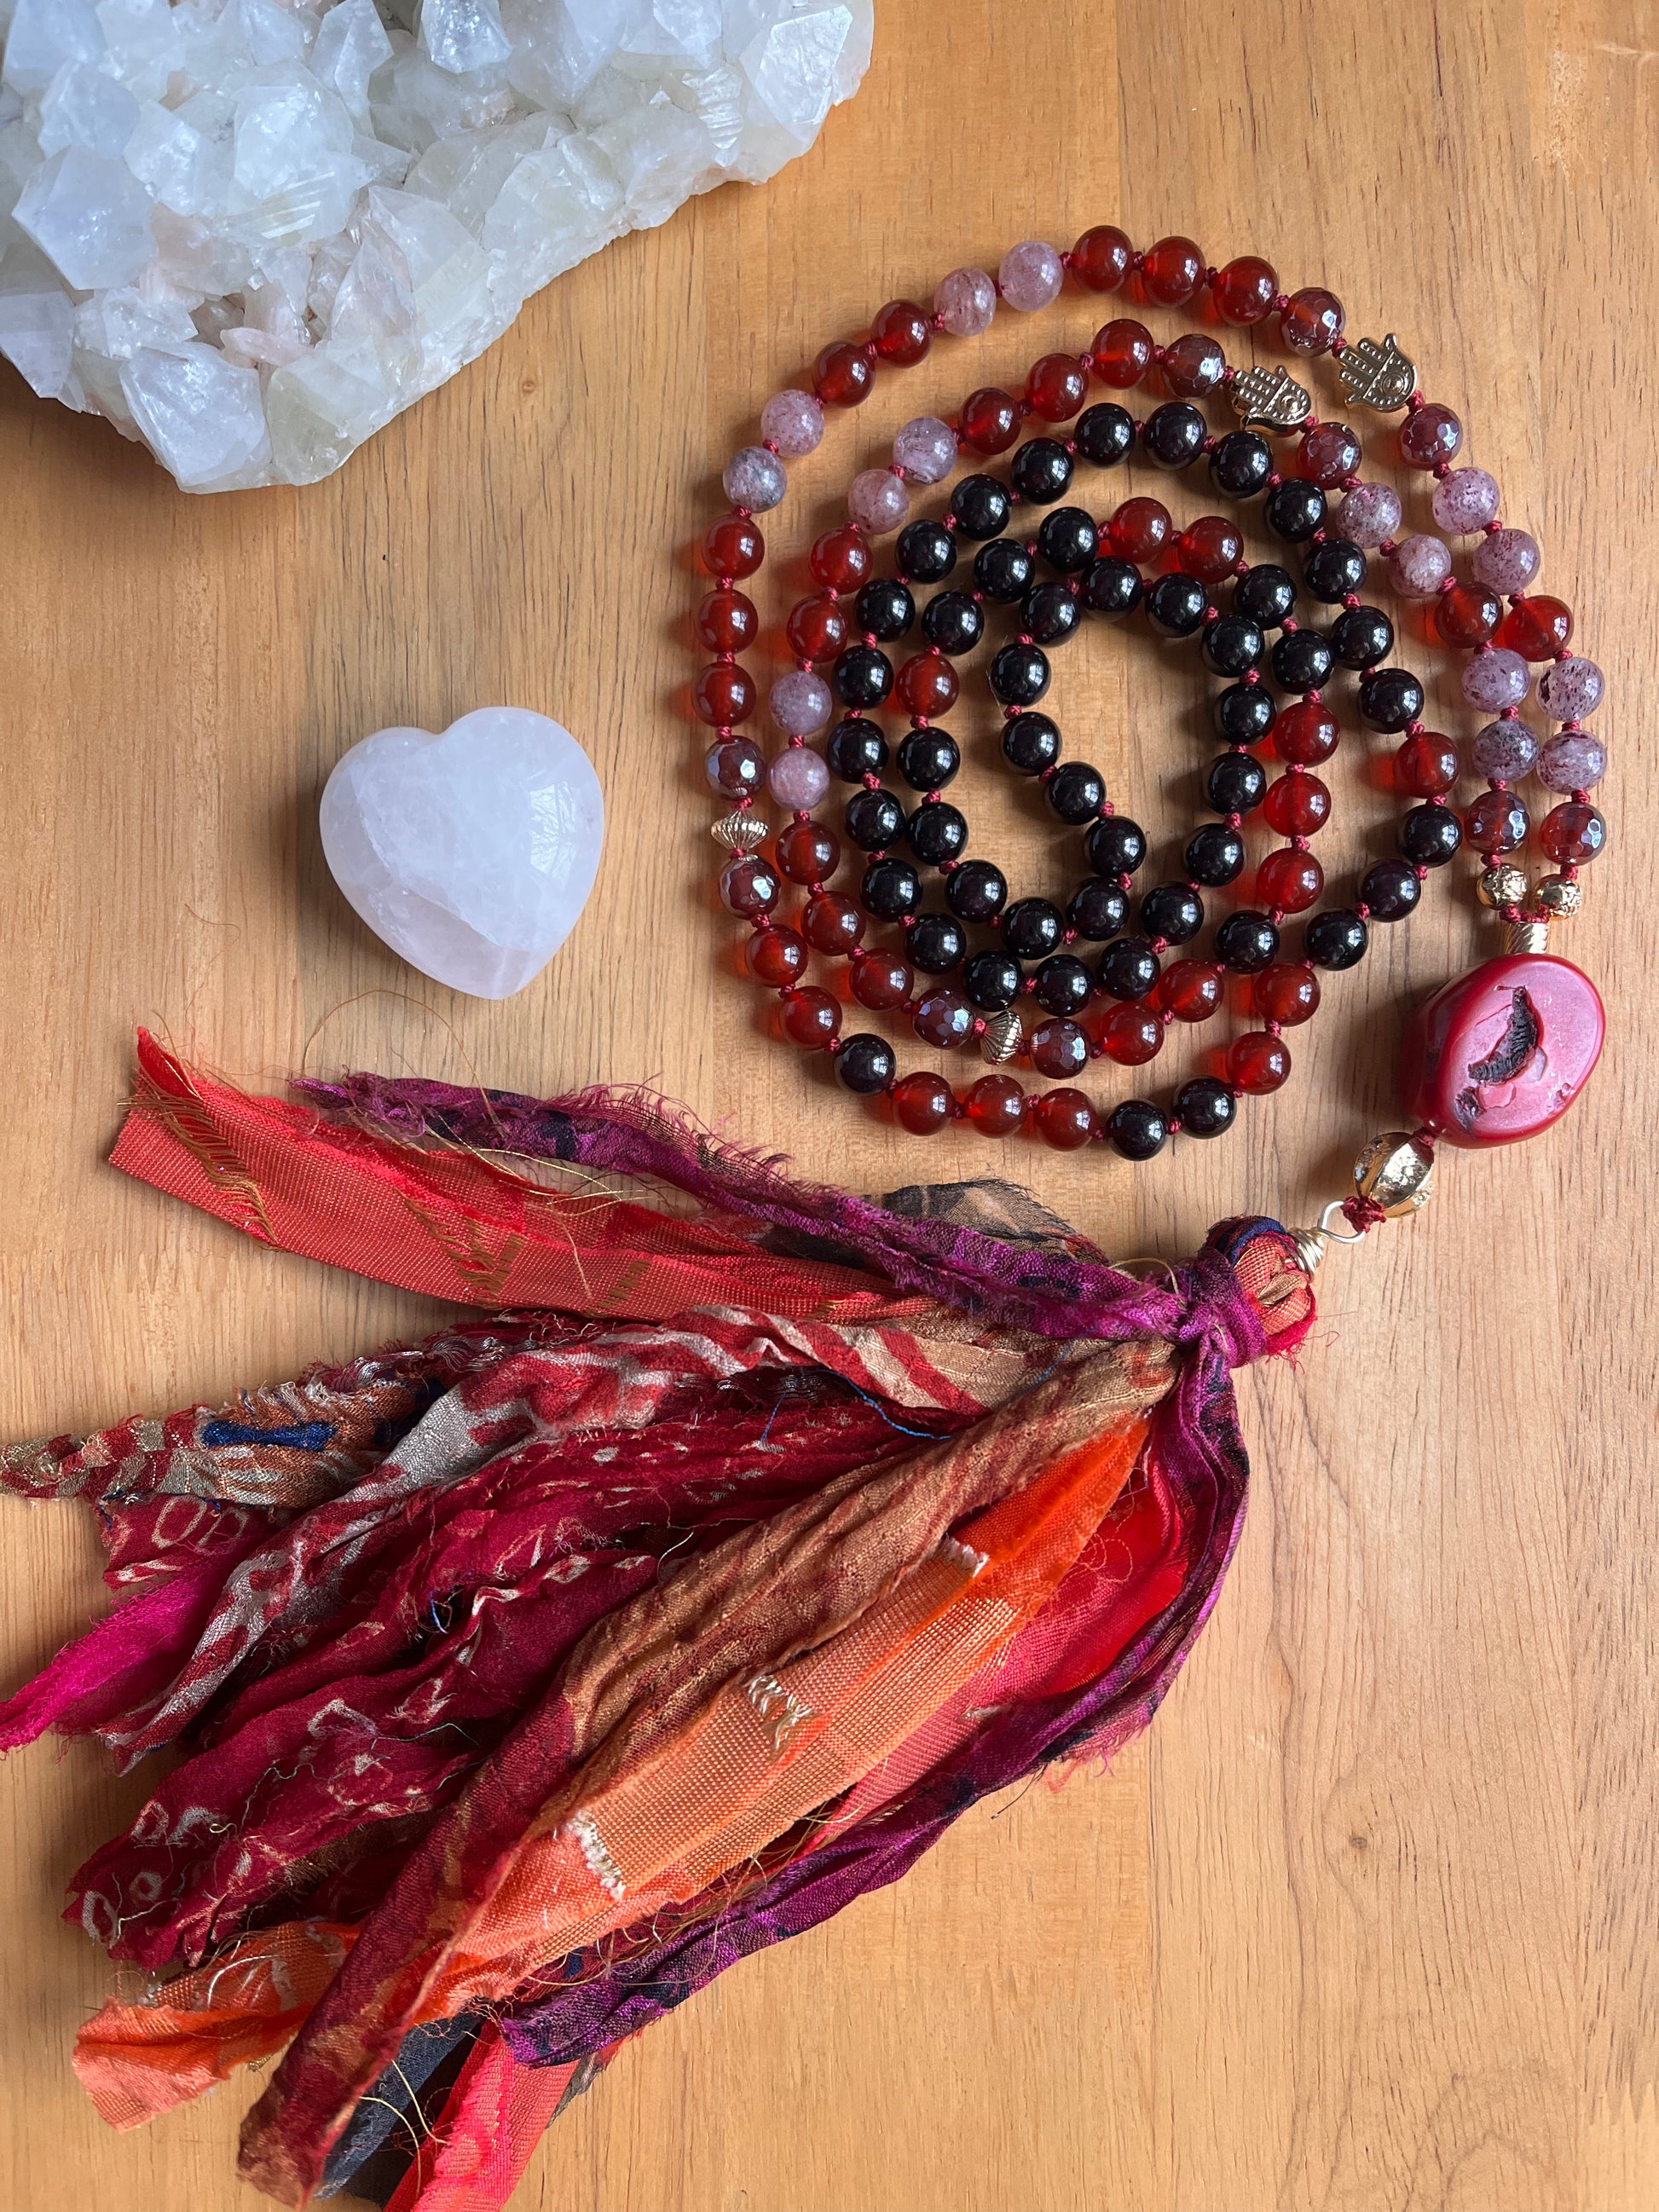 How Using Mala Beads Can Help Develop Mindfulness and Compassion